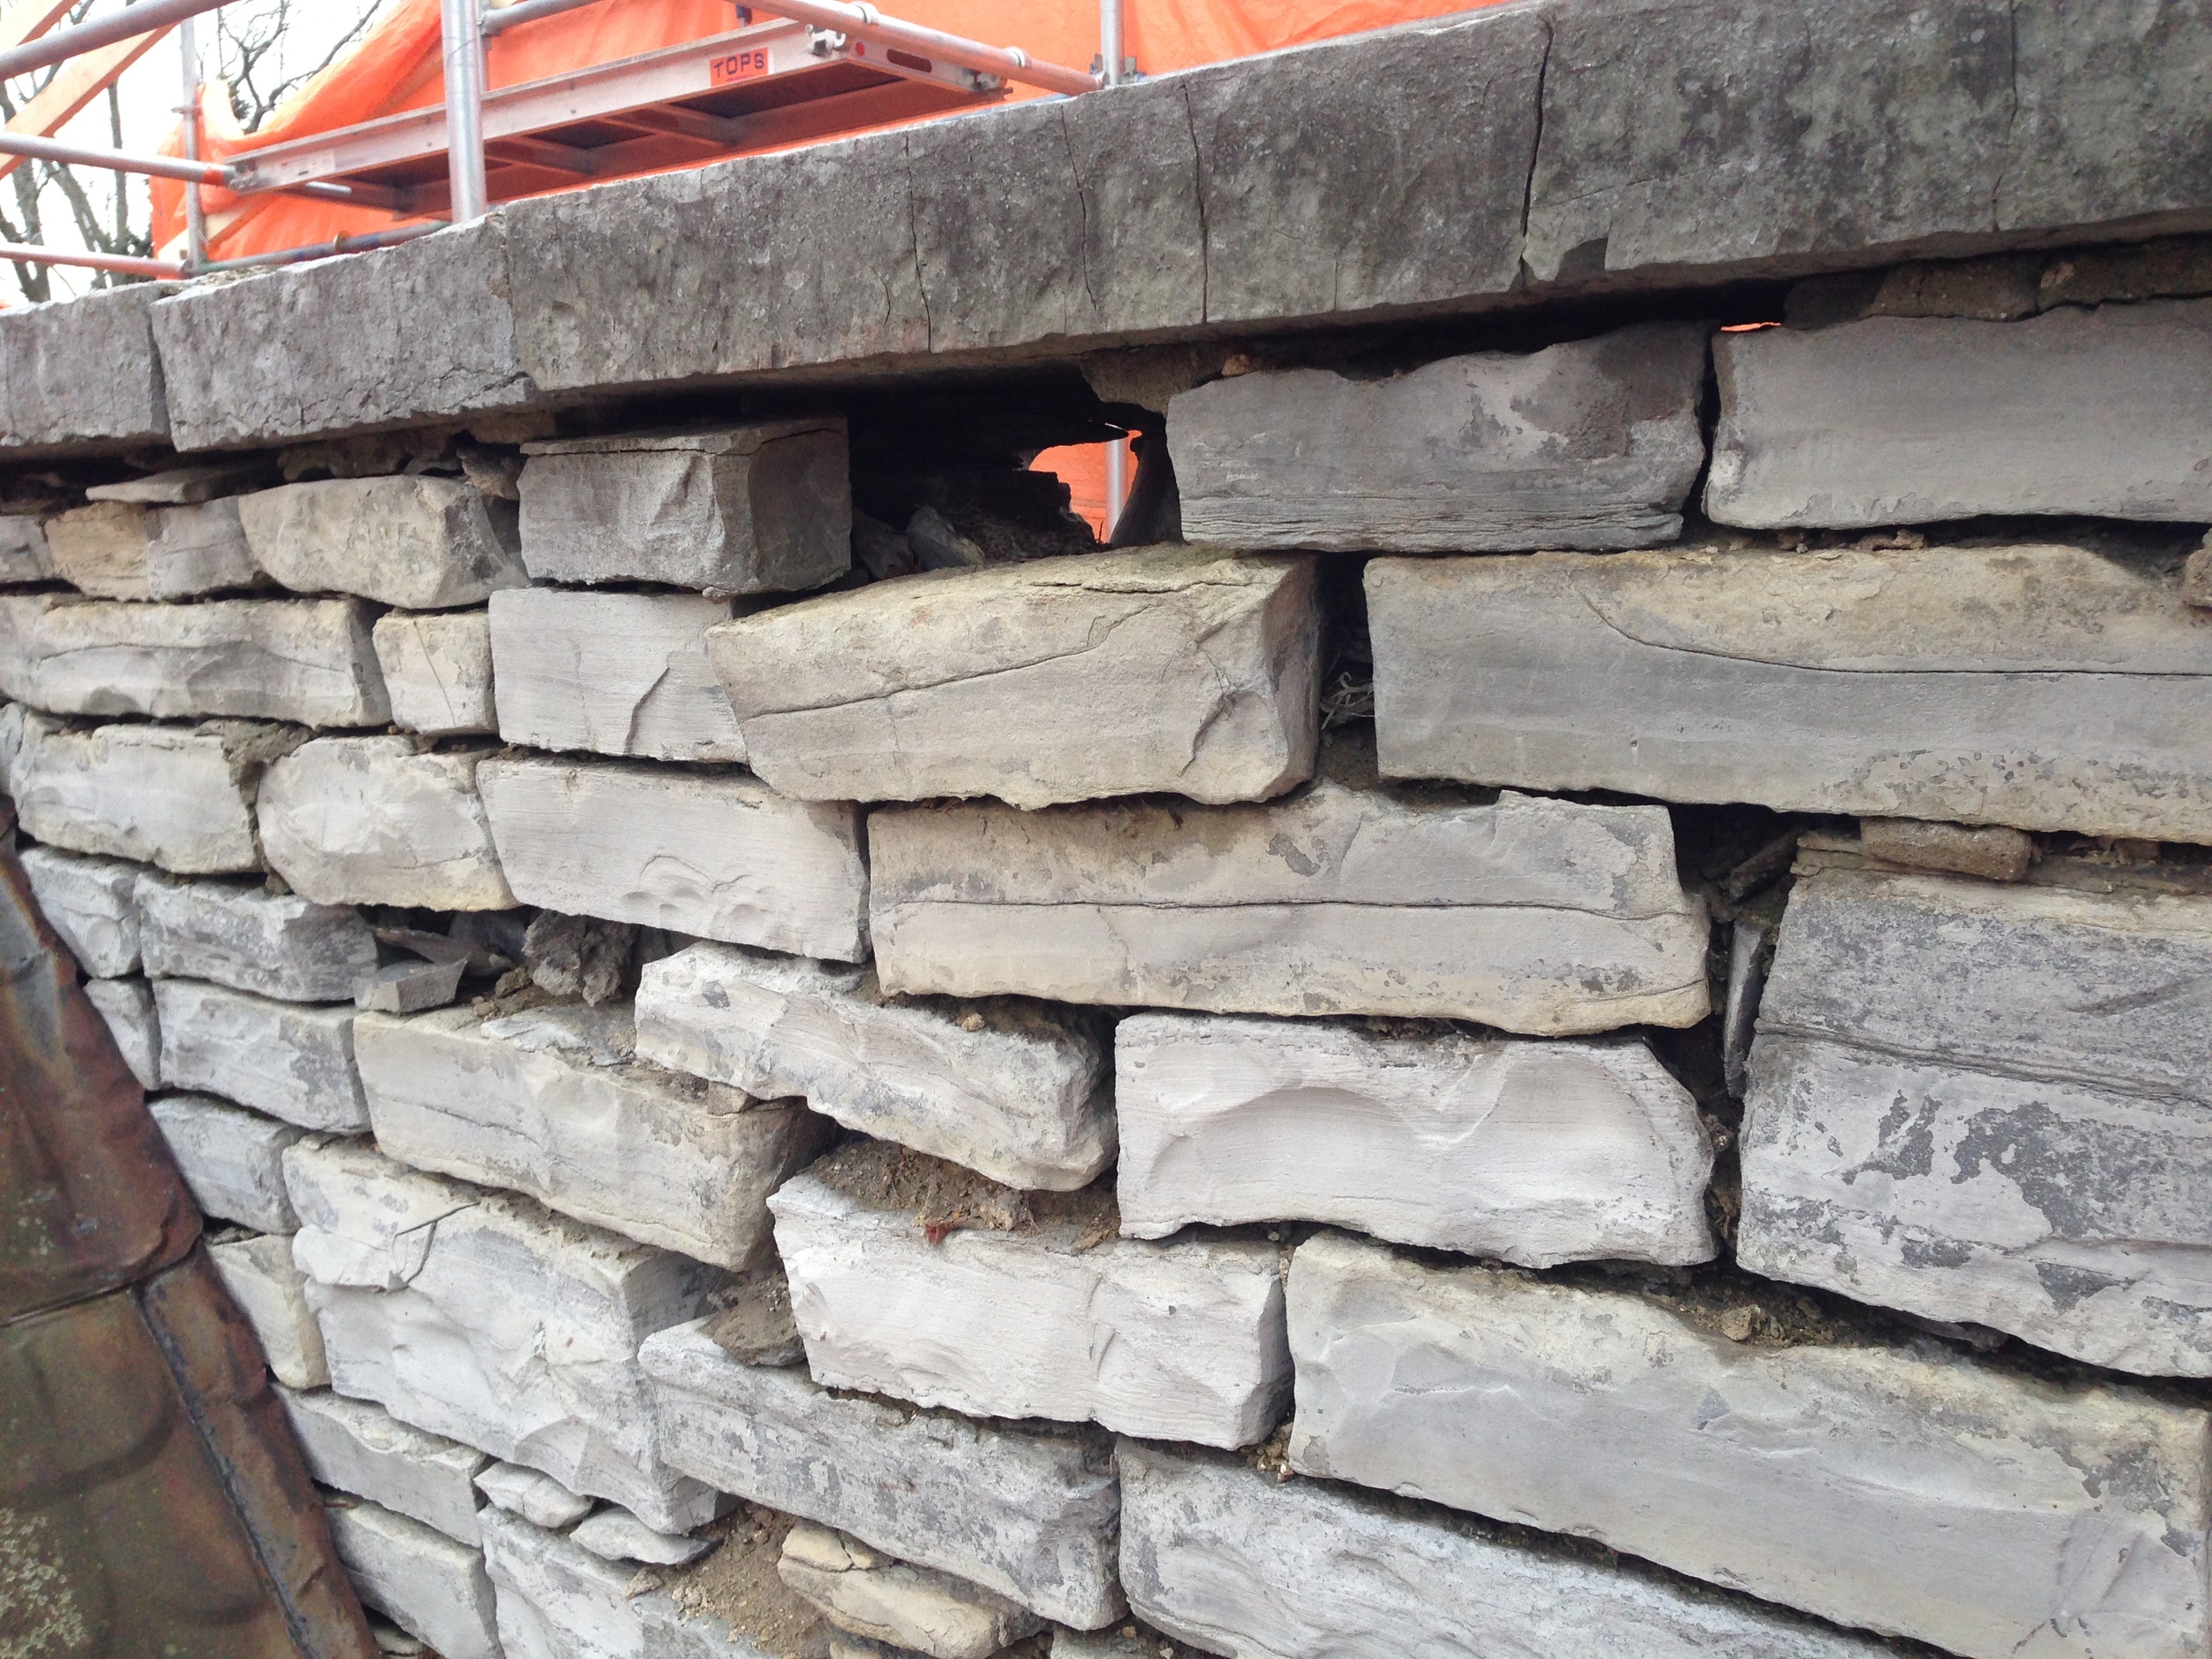  Dislodged stones, a result of moisture accumulation within the wall and resulting freeze-thaw movement.&nbsp; 